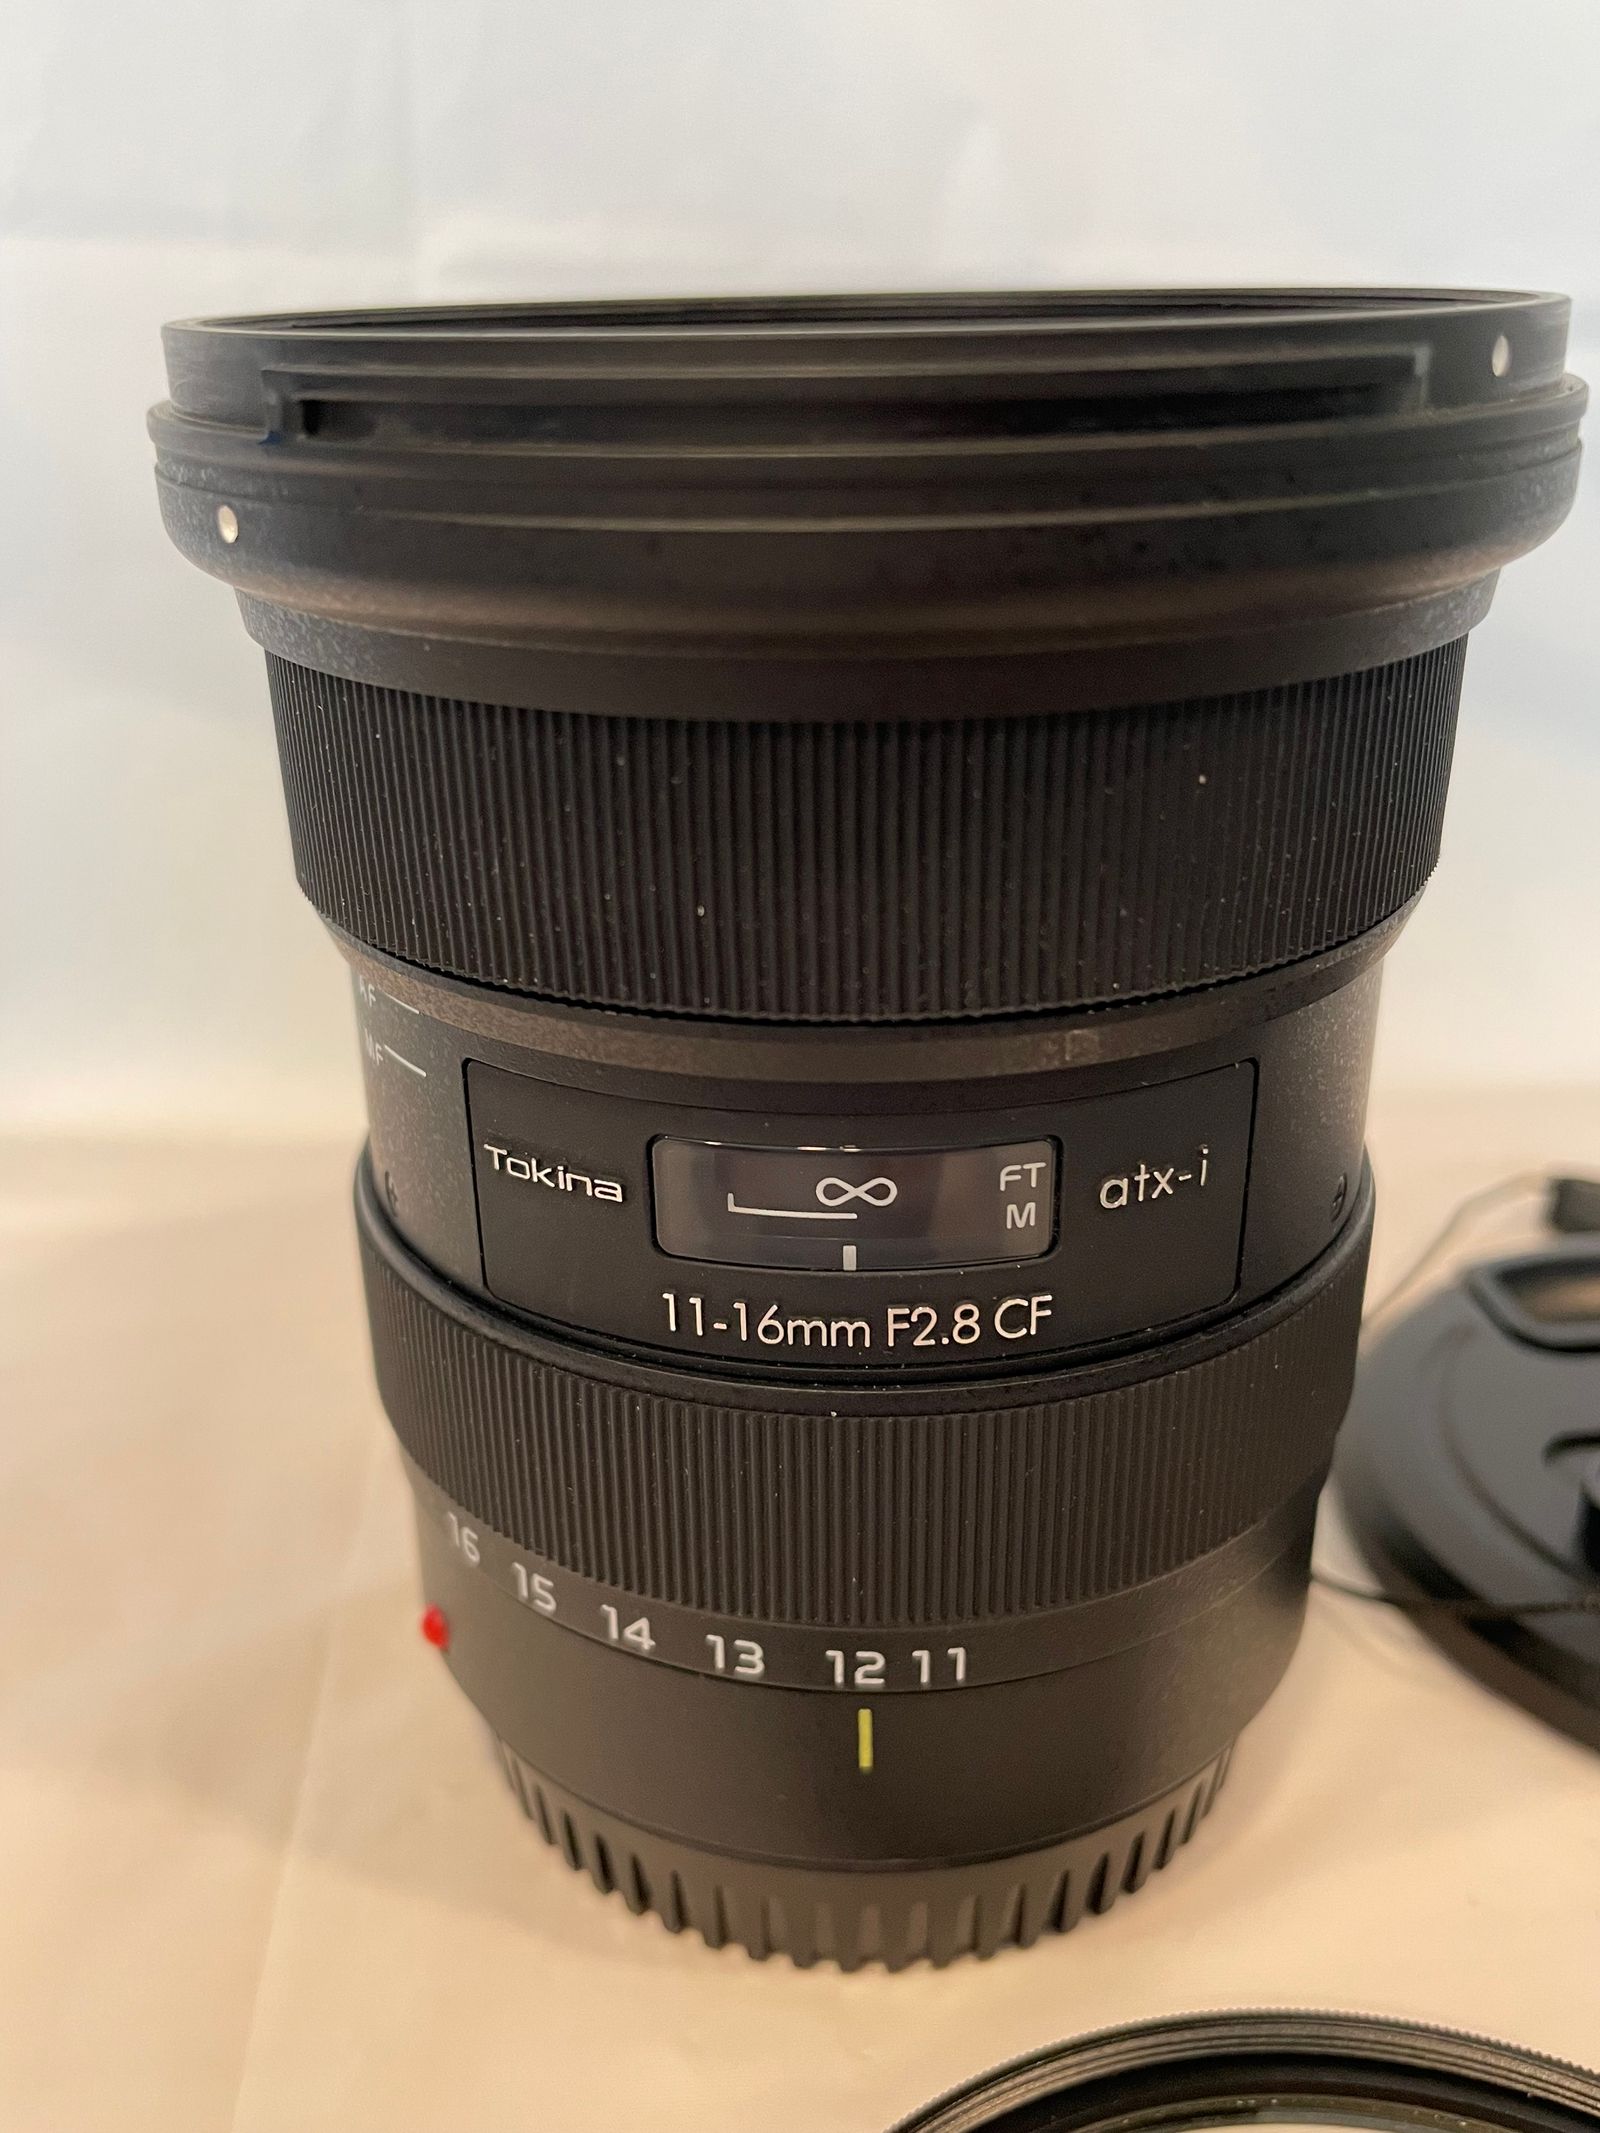 Tokina atx-i 11-16mm F2.8 CF for Canon EF mount APS-C